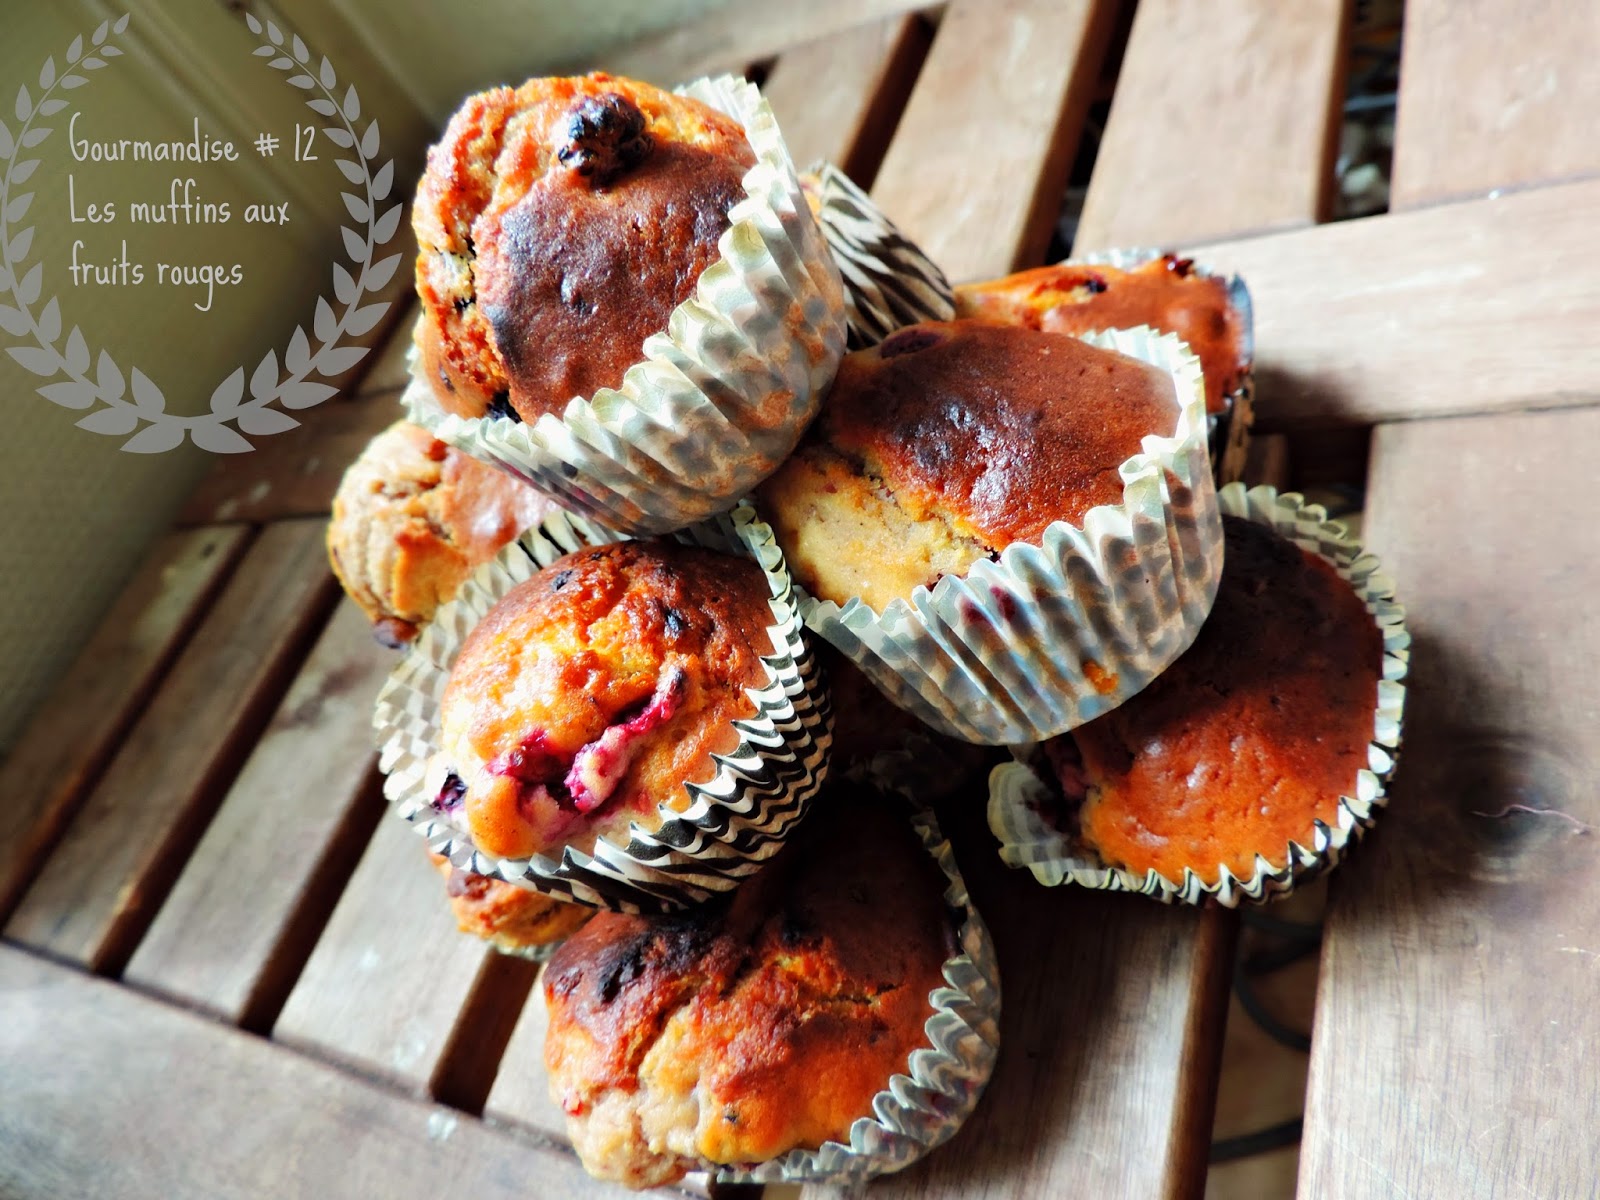 http://mynameisgeorges.blogspot.com/2014/05/gourmandise-12-les-muffins-aux-fruits.html